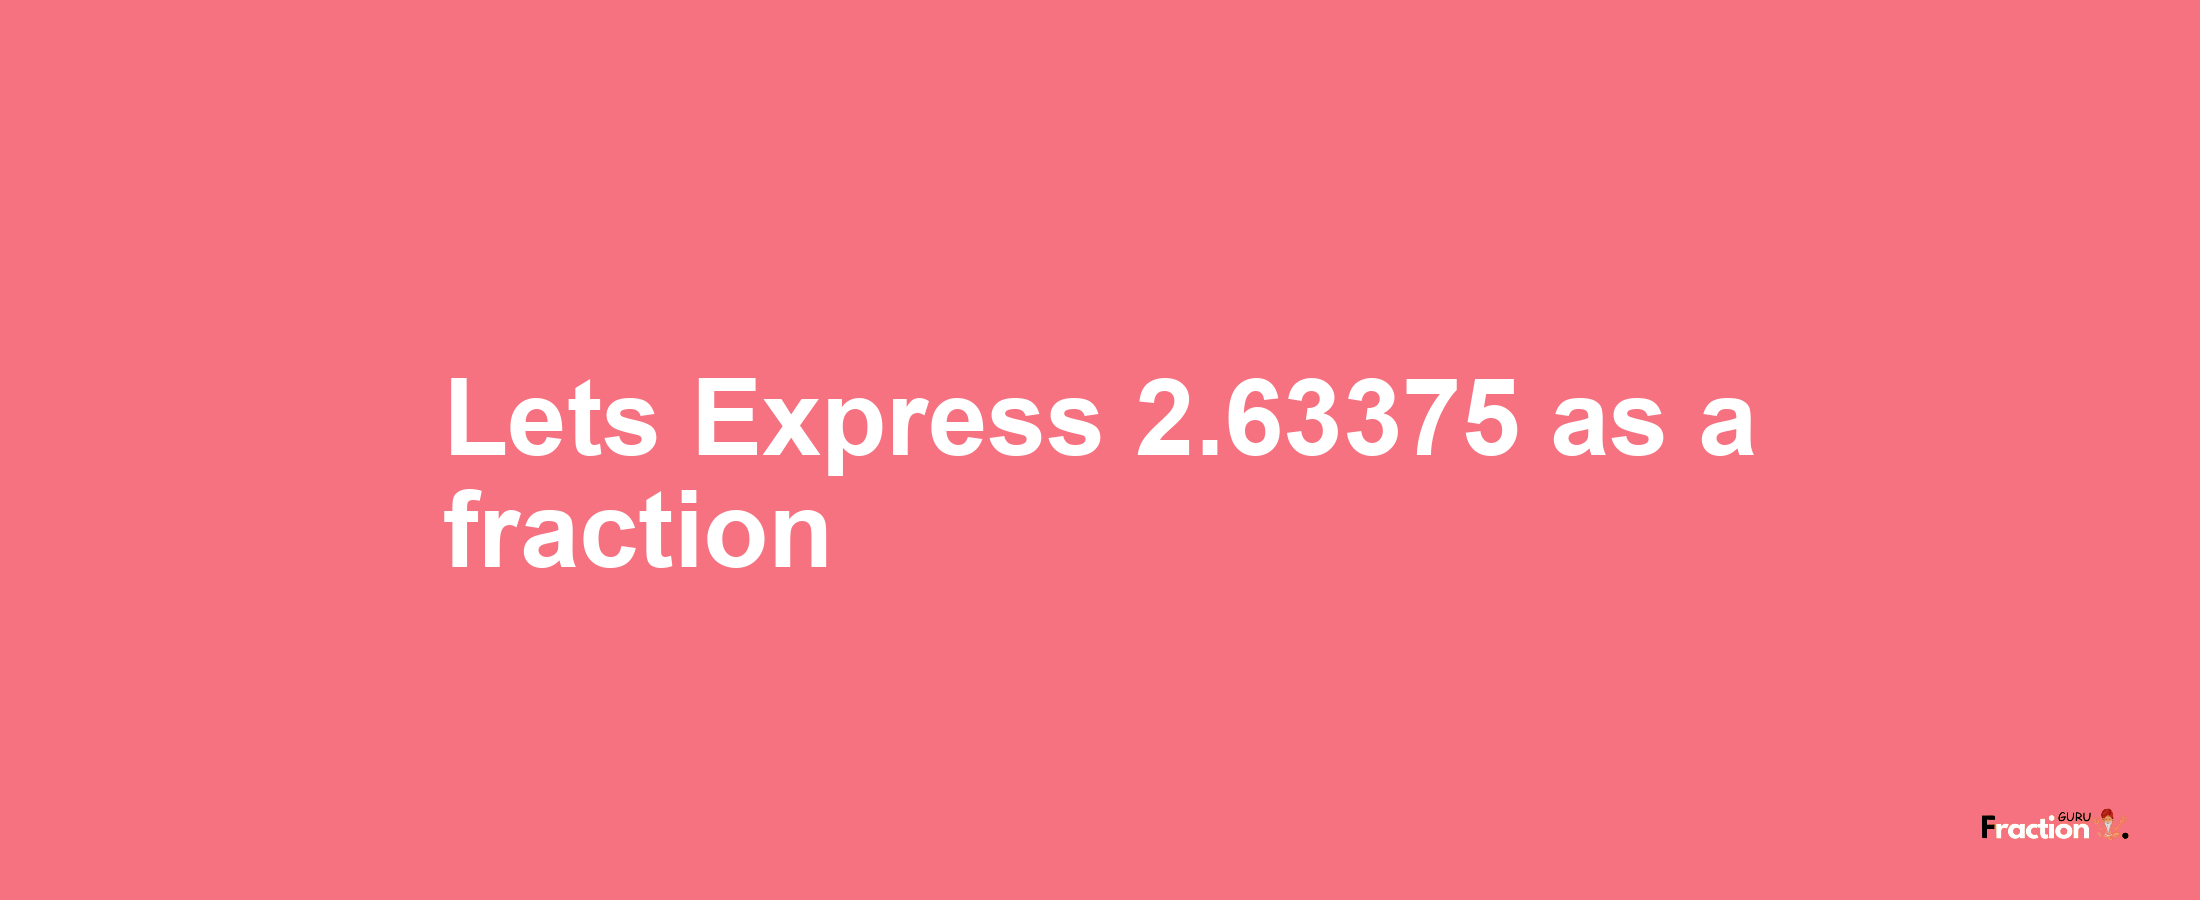 Lets Express 2.63375 as afraction